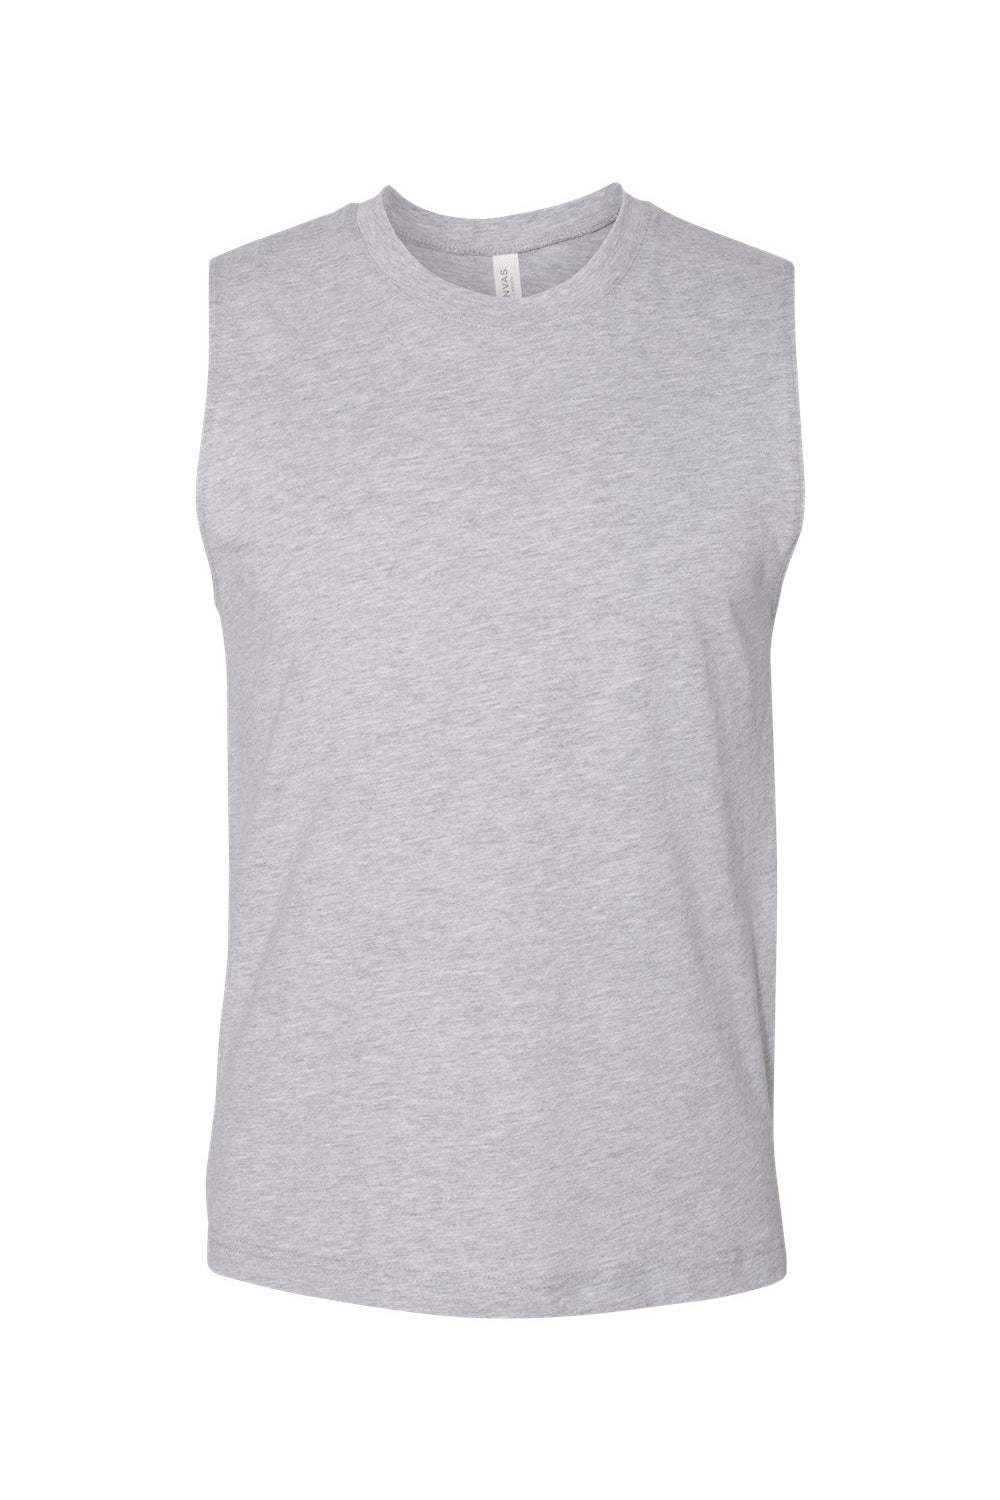 Bella + Canvas 3483 Mens Jersey Muscle Tank Top Heather Grey Flat Front